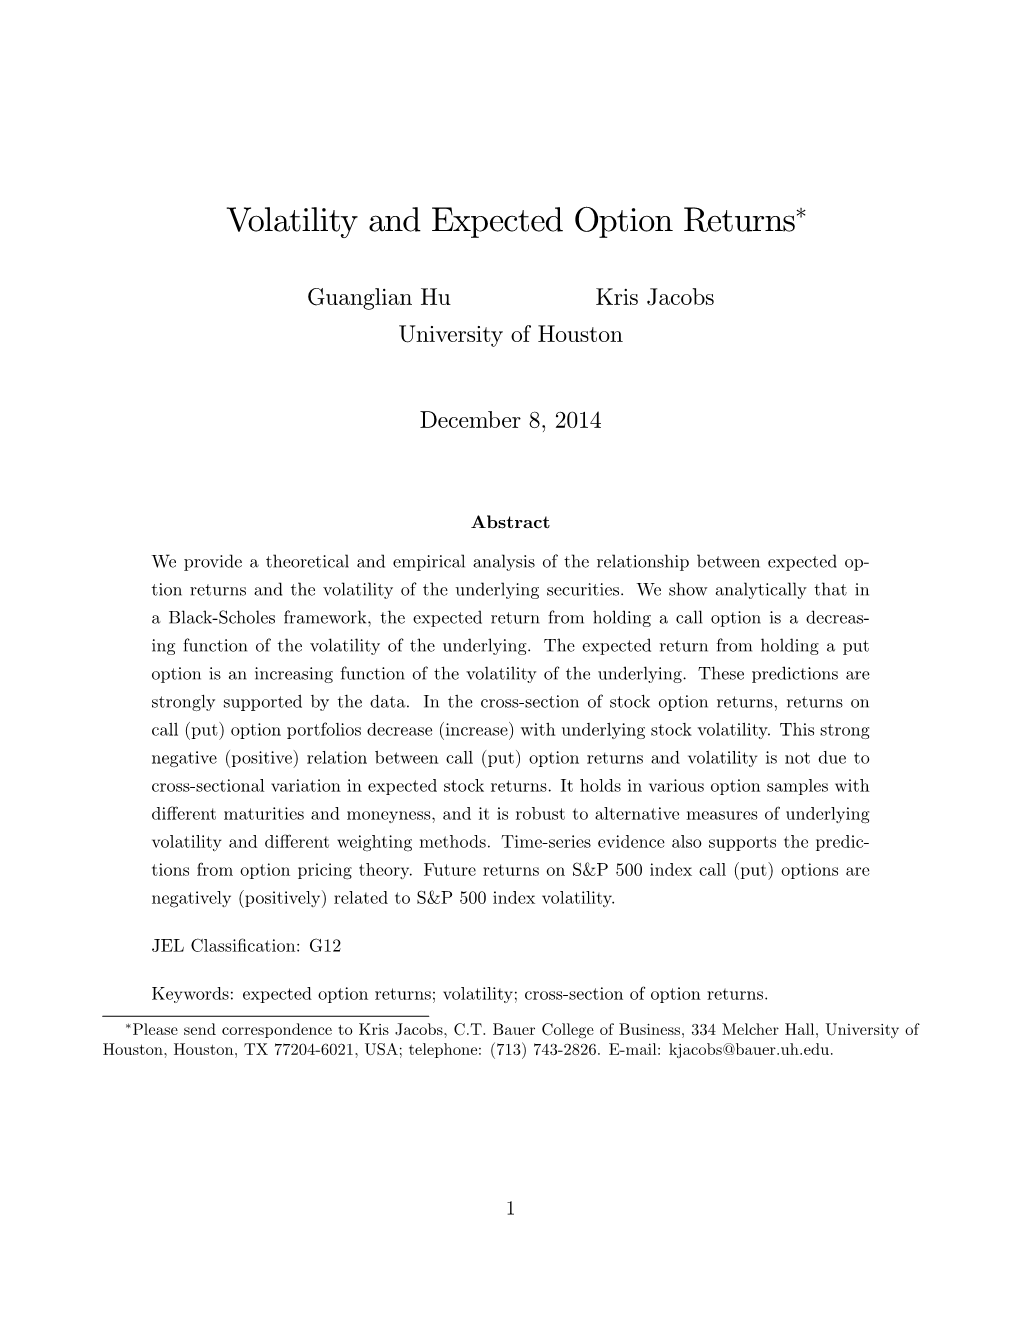 Volatility and Expected Option Returns"